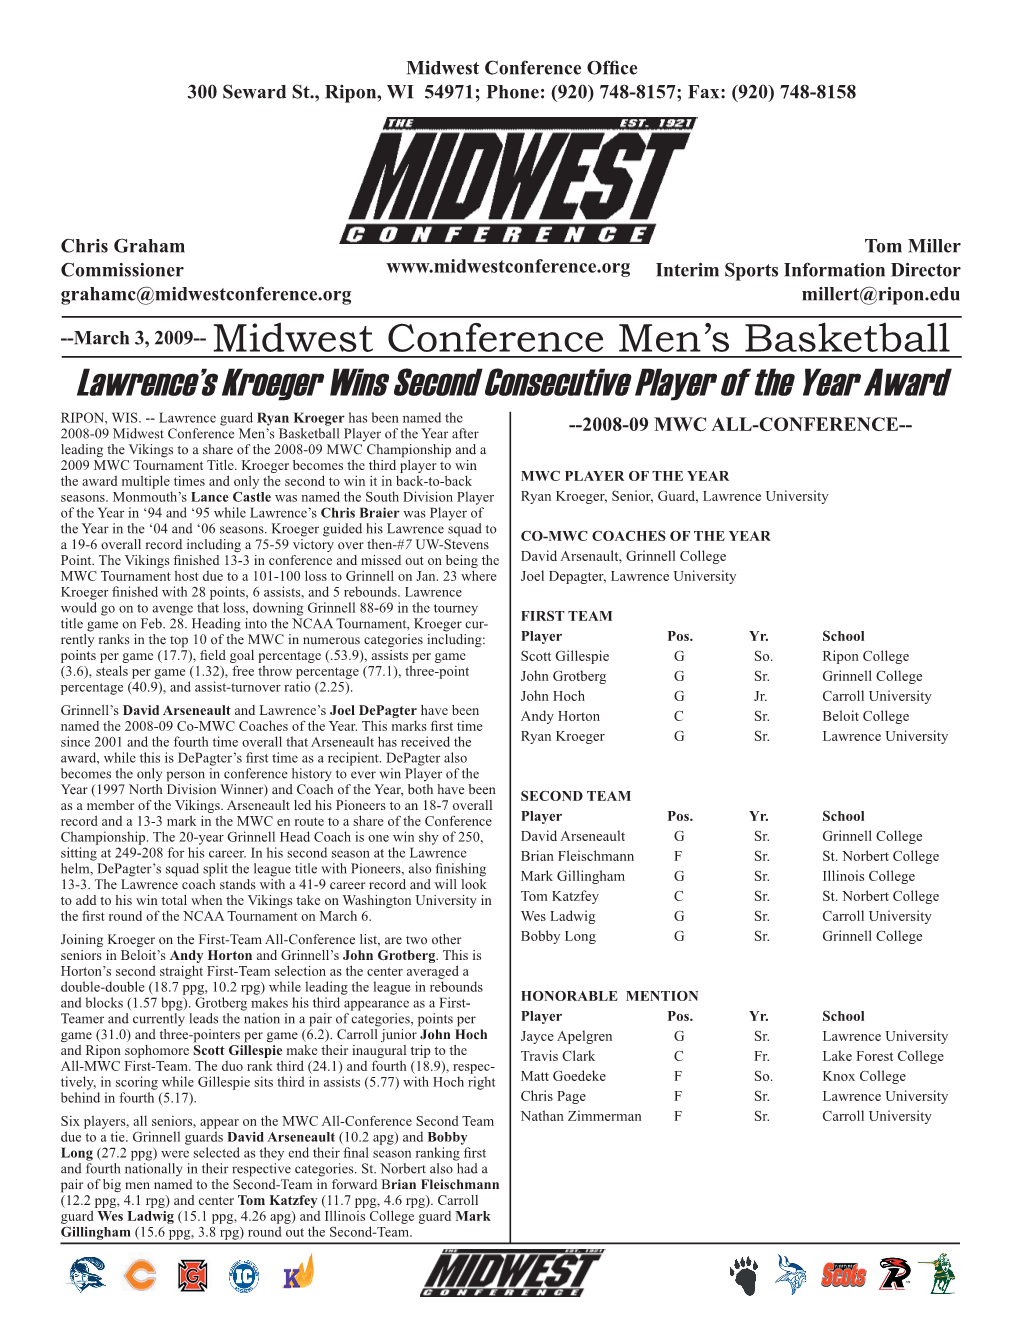 Midwest Conference Men's Basketball